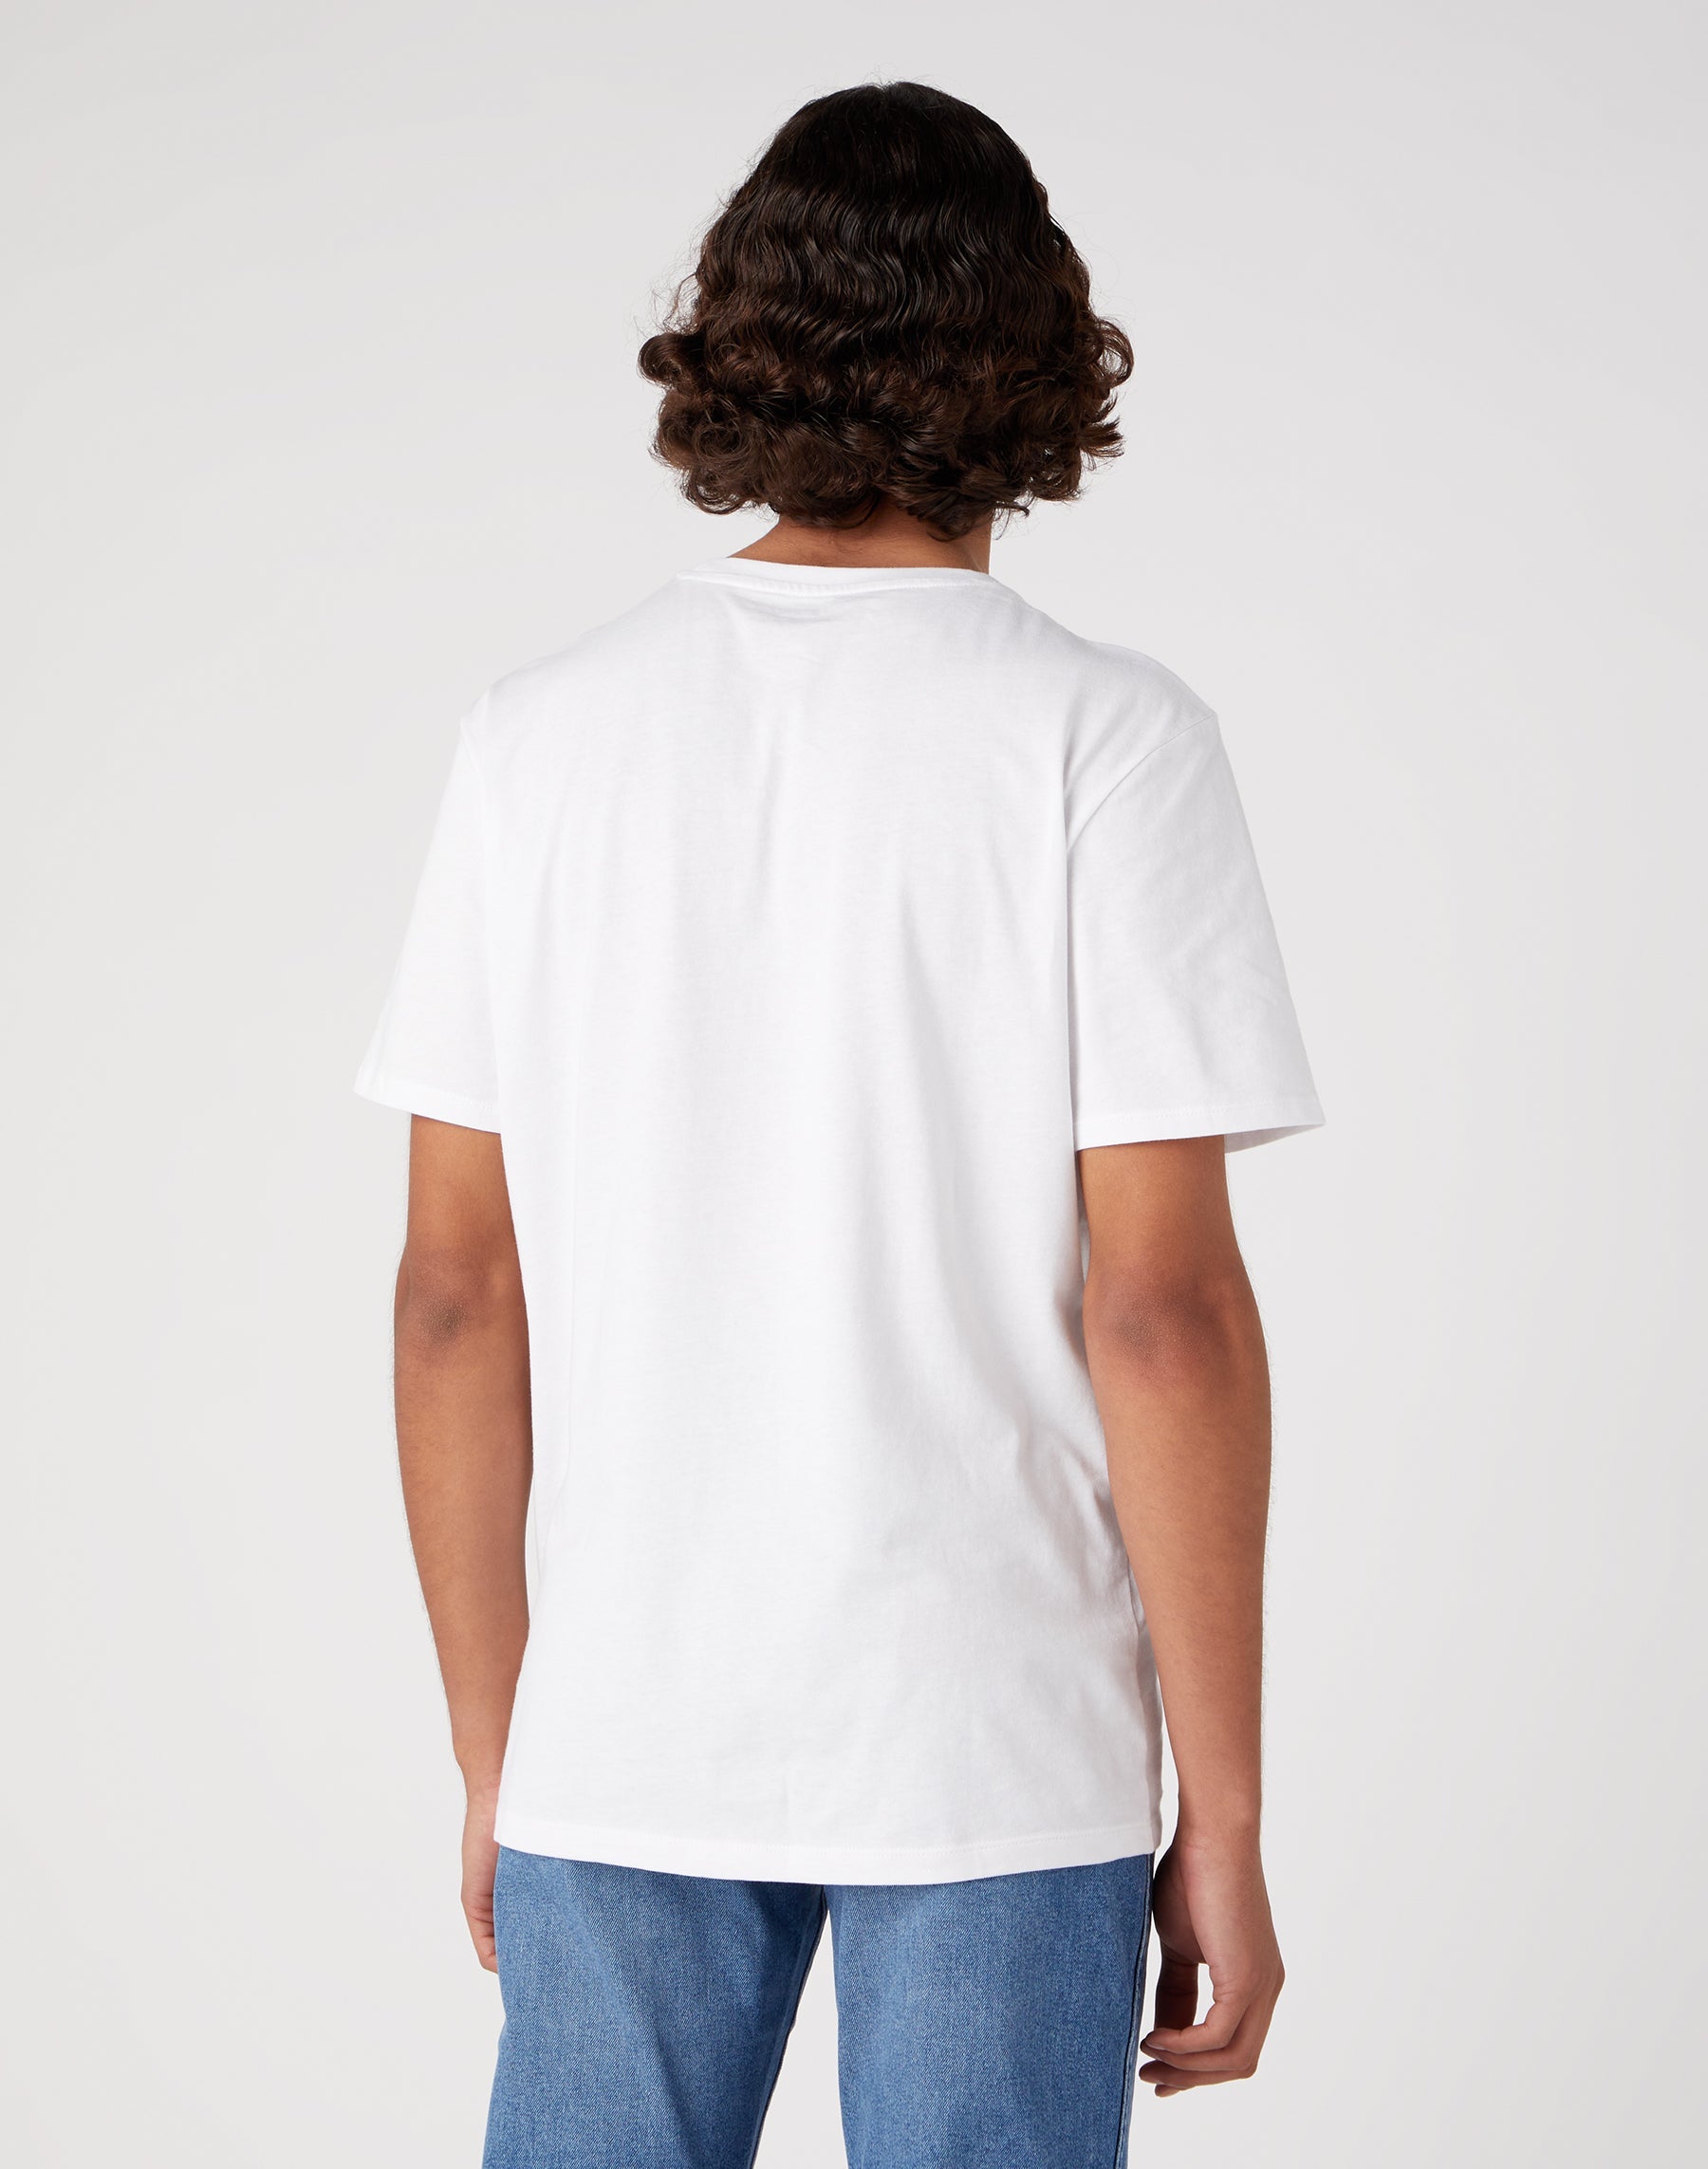 Graphic Tee in White T-Shirts Wrangler   